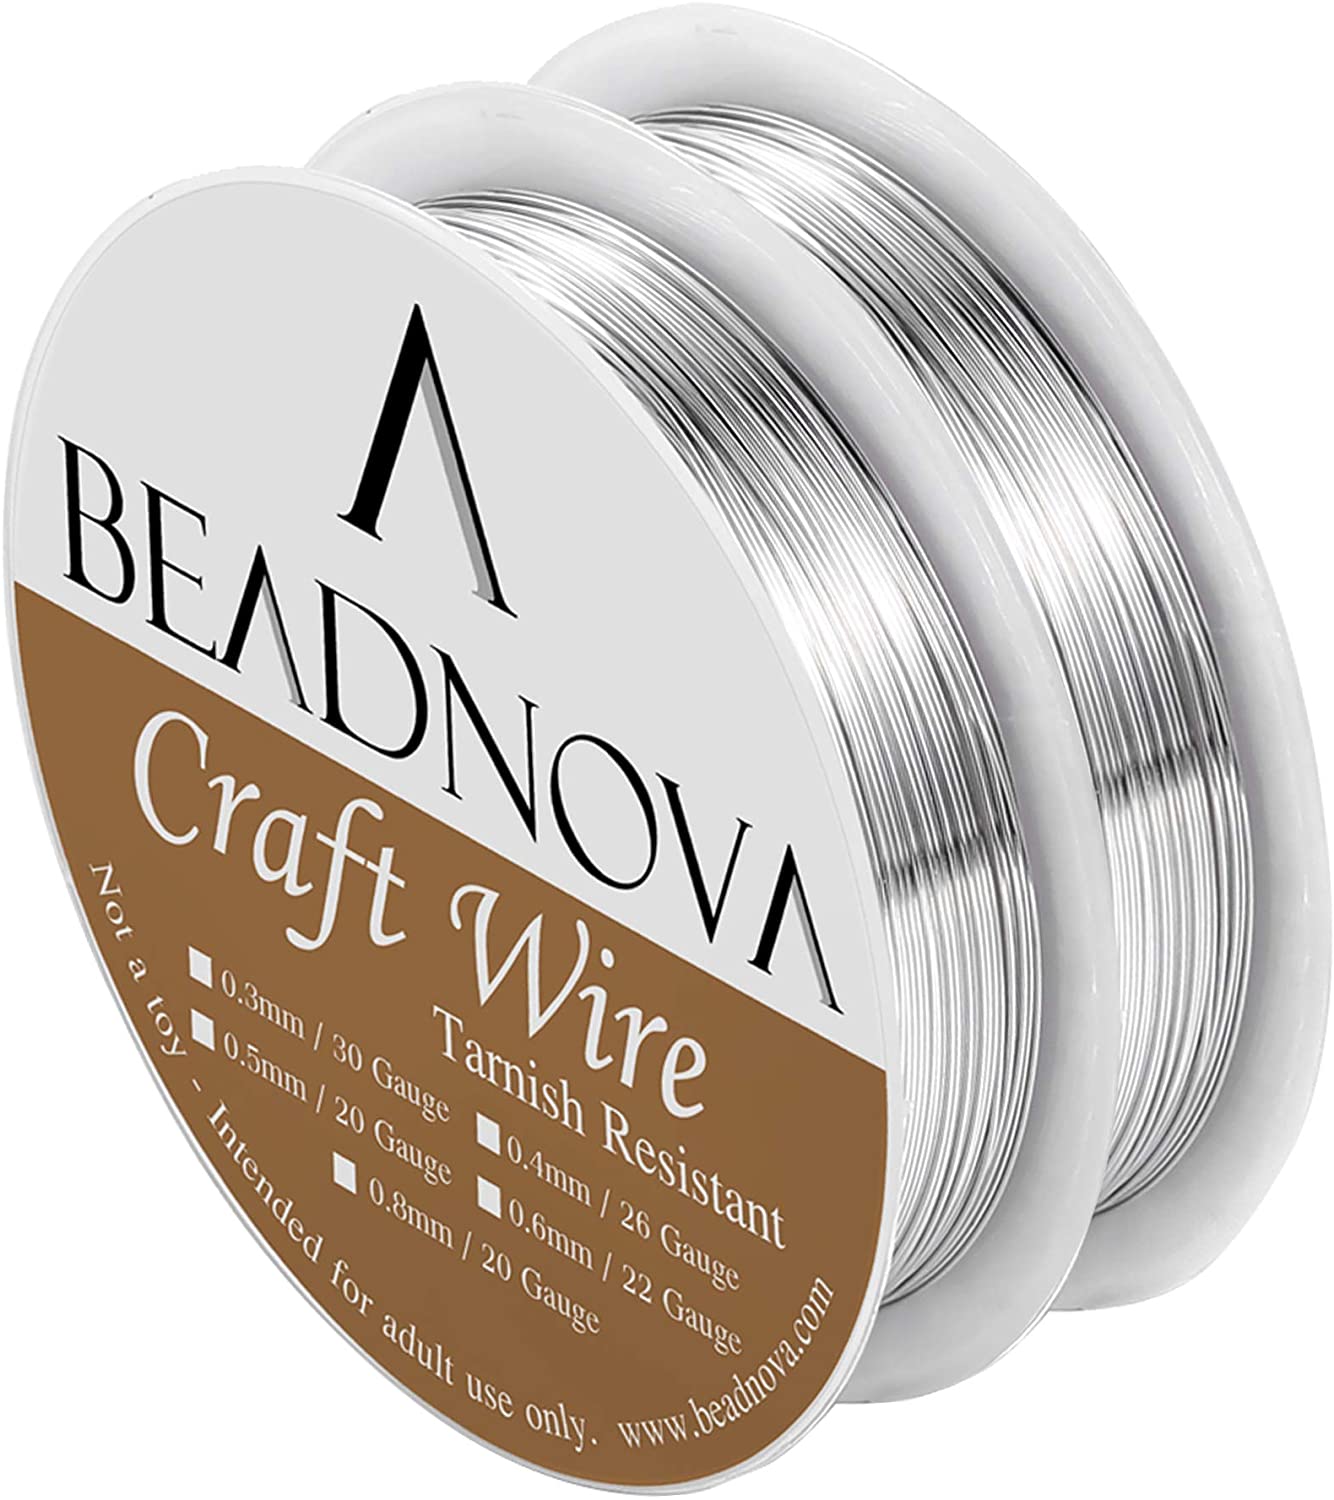 BEADNOVA Bare Copper Wire for Jewelry Making Tarnish Resistant (Silver  Plated, 26 Gauge) - Beadnova